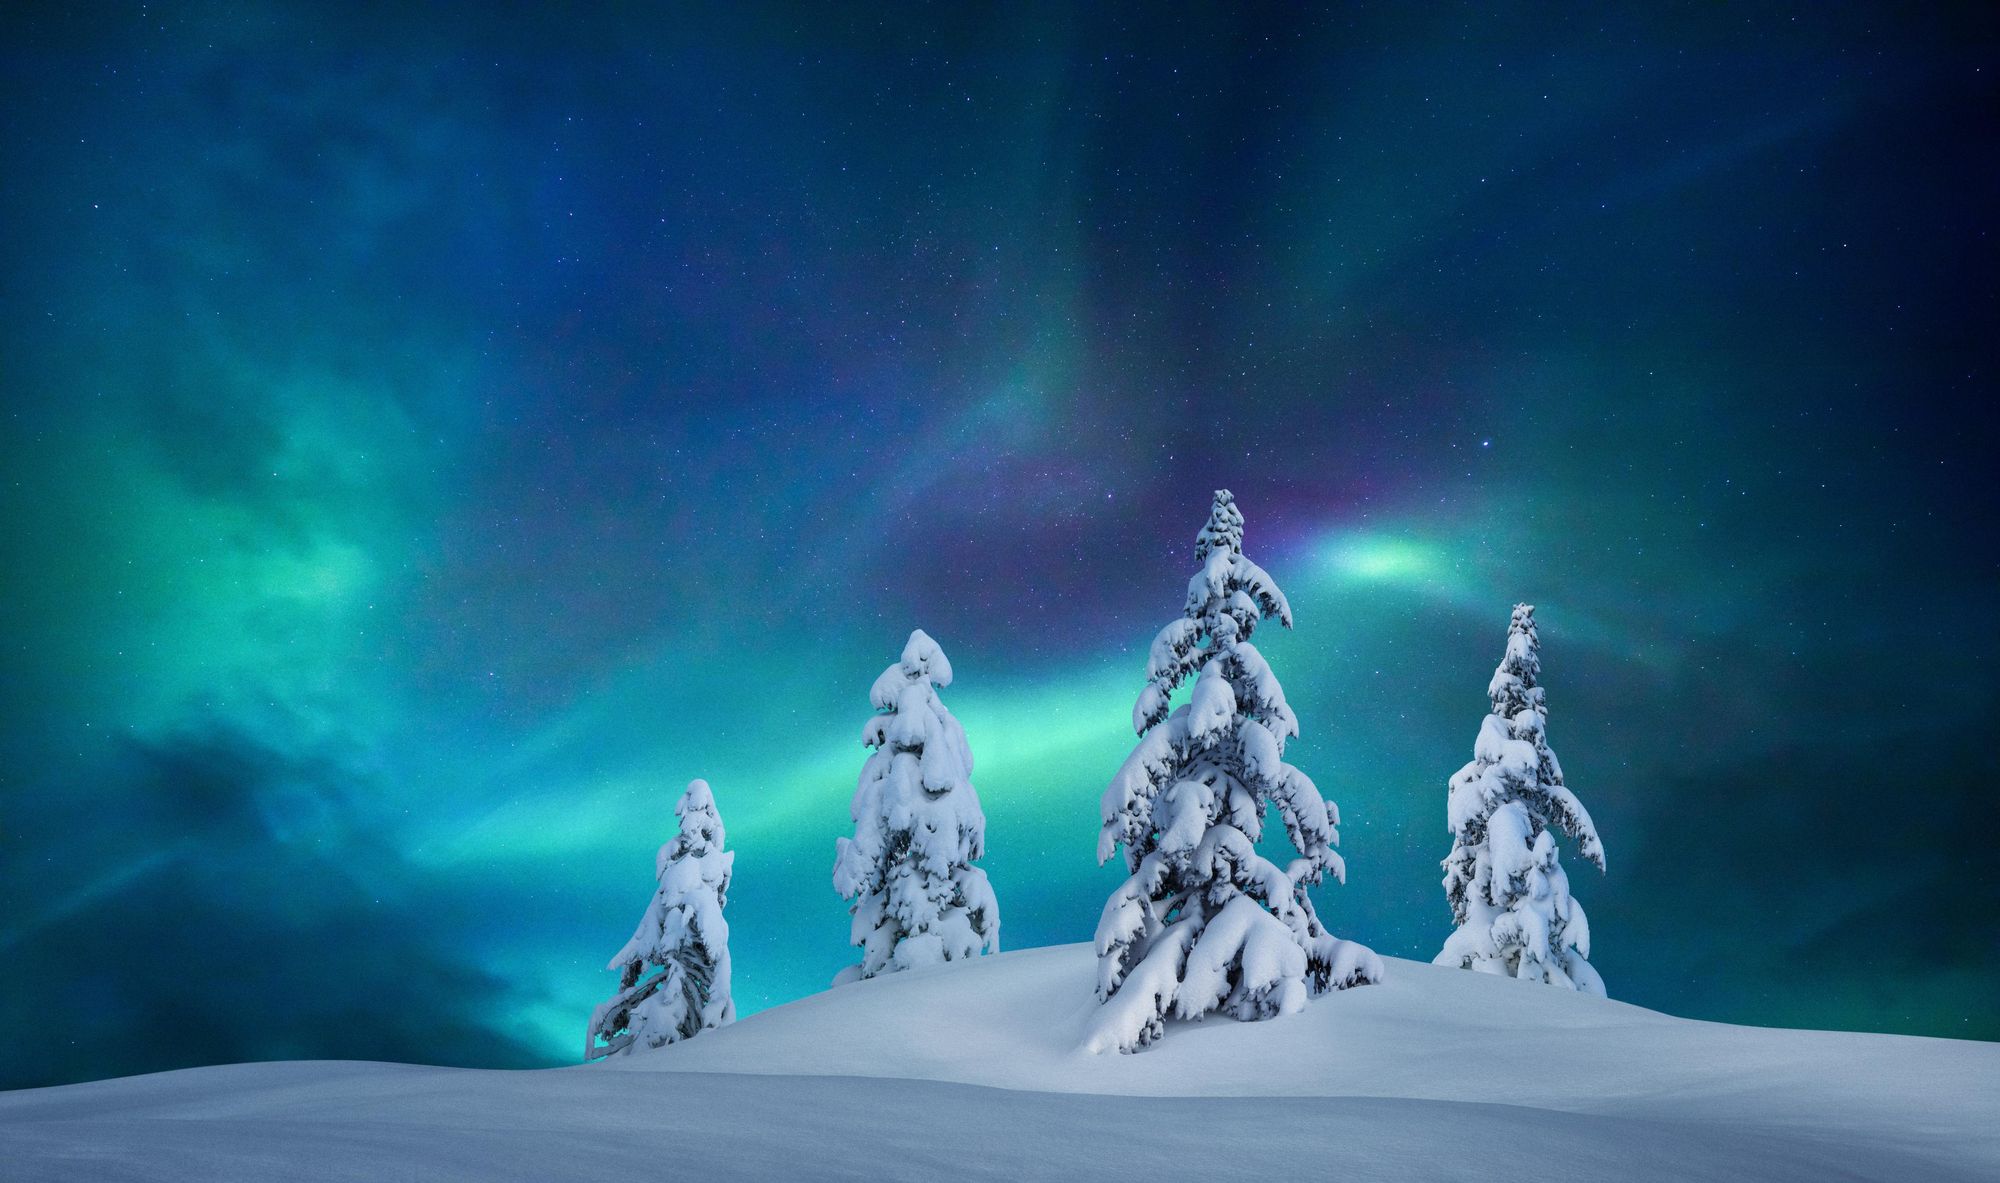 The northern lights above snow-laden spruce trees in Pyhä-Luosto National Park.